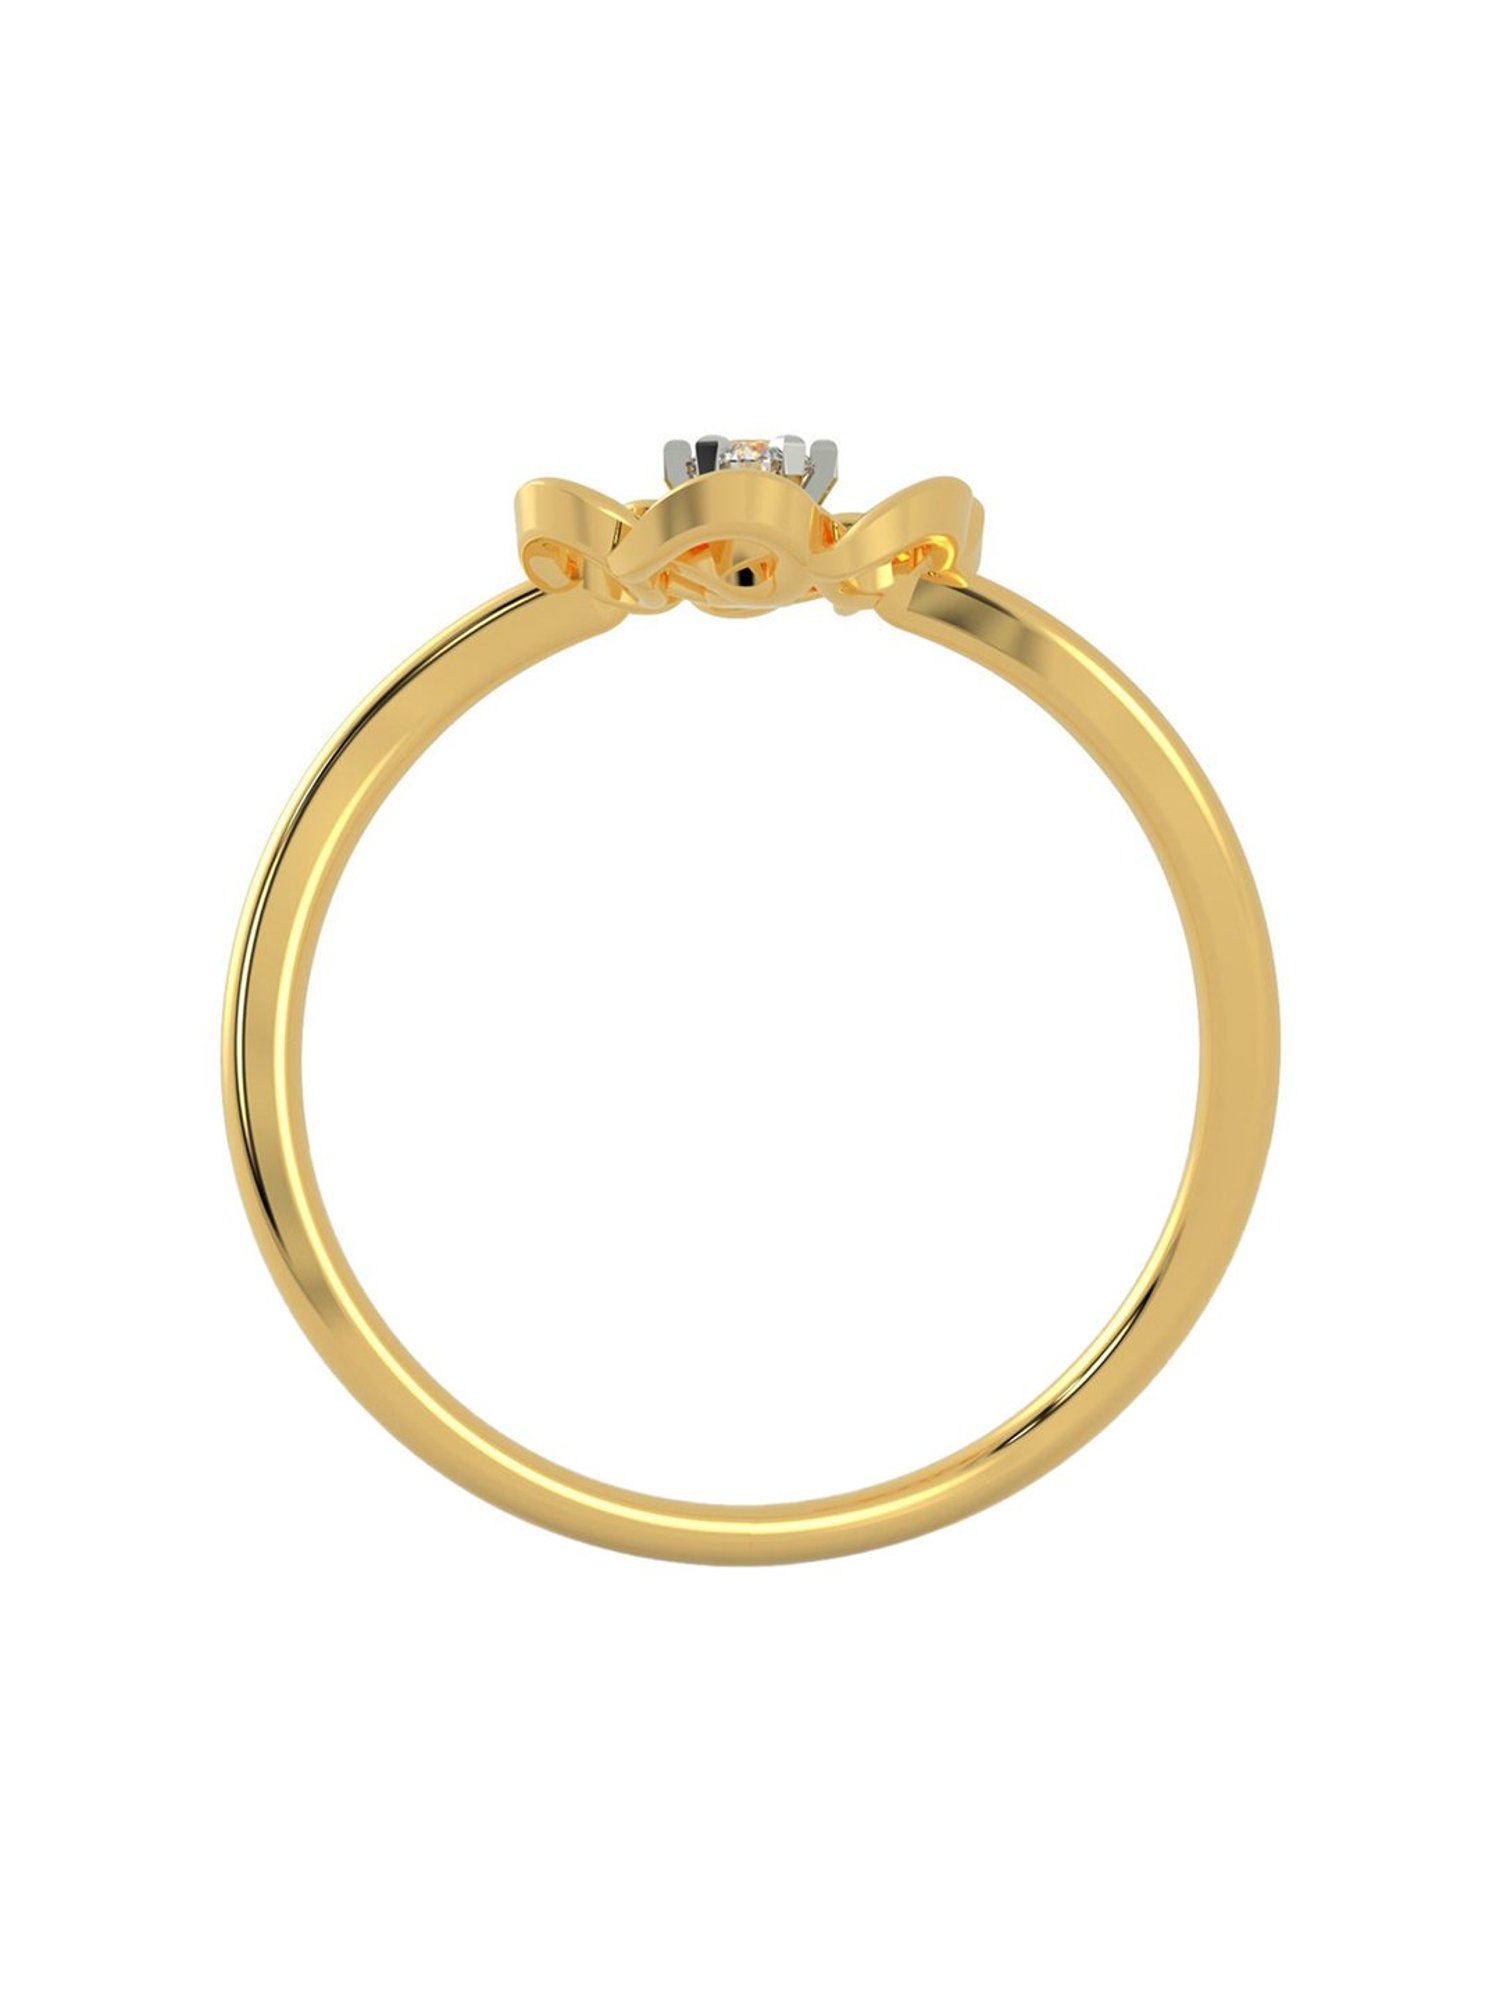 Gold Finger Ring Price Starting From Rs 5,000/Gm. Find Verified Sellers in  Bangalore - JdMart